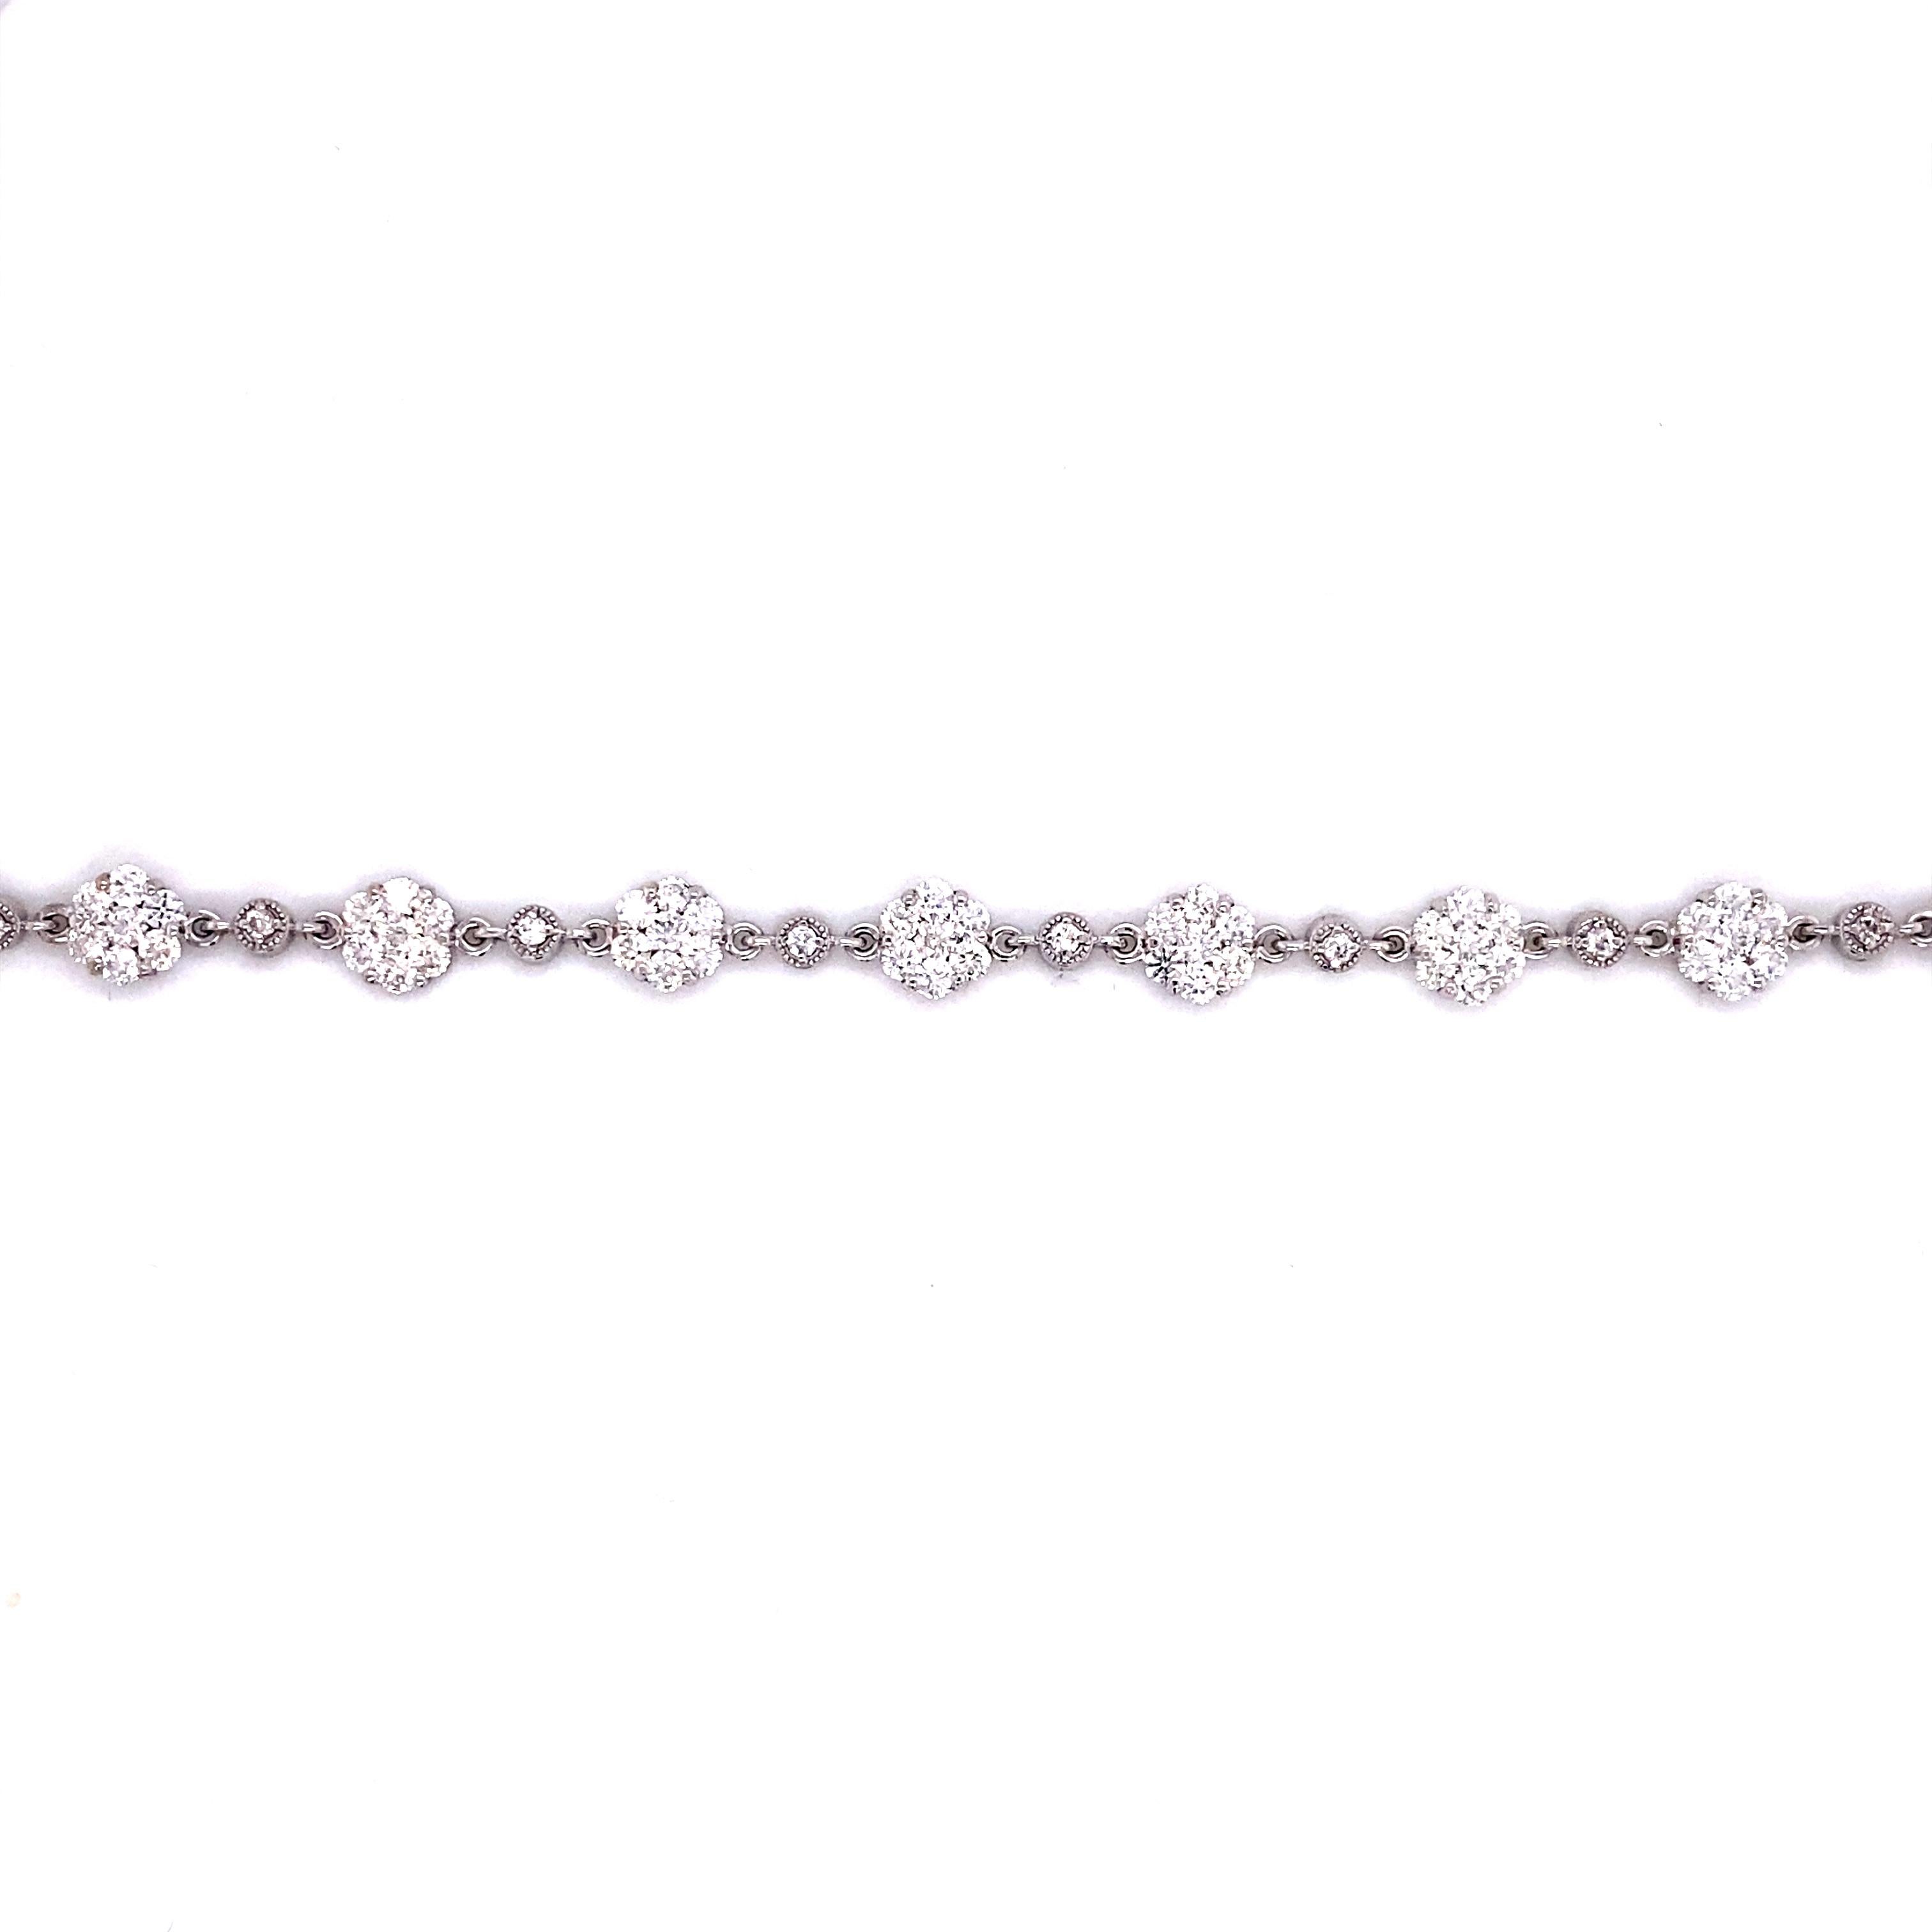 Floral Diamond Link Bracelet 

A sweet and delicate diamond flower link bracelet perfect for layering on the wrist. Abundance of diamonds,   weighing over 3 carats of natural round brilliant diamonds.  Crafted in 18 karat white gold. 

Details: 
18